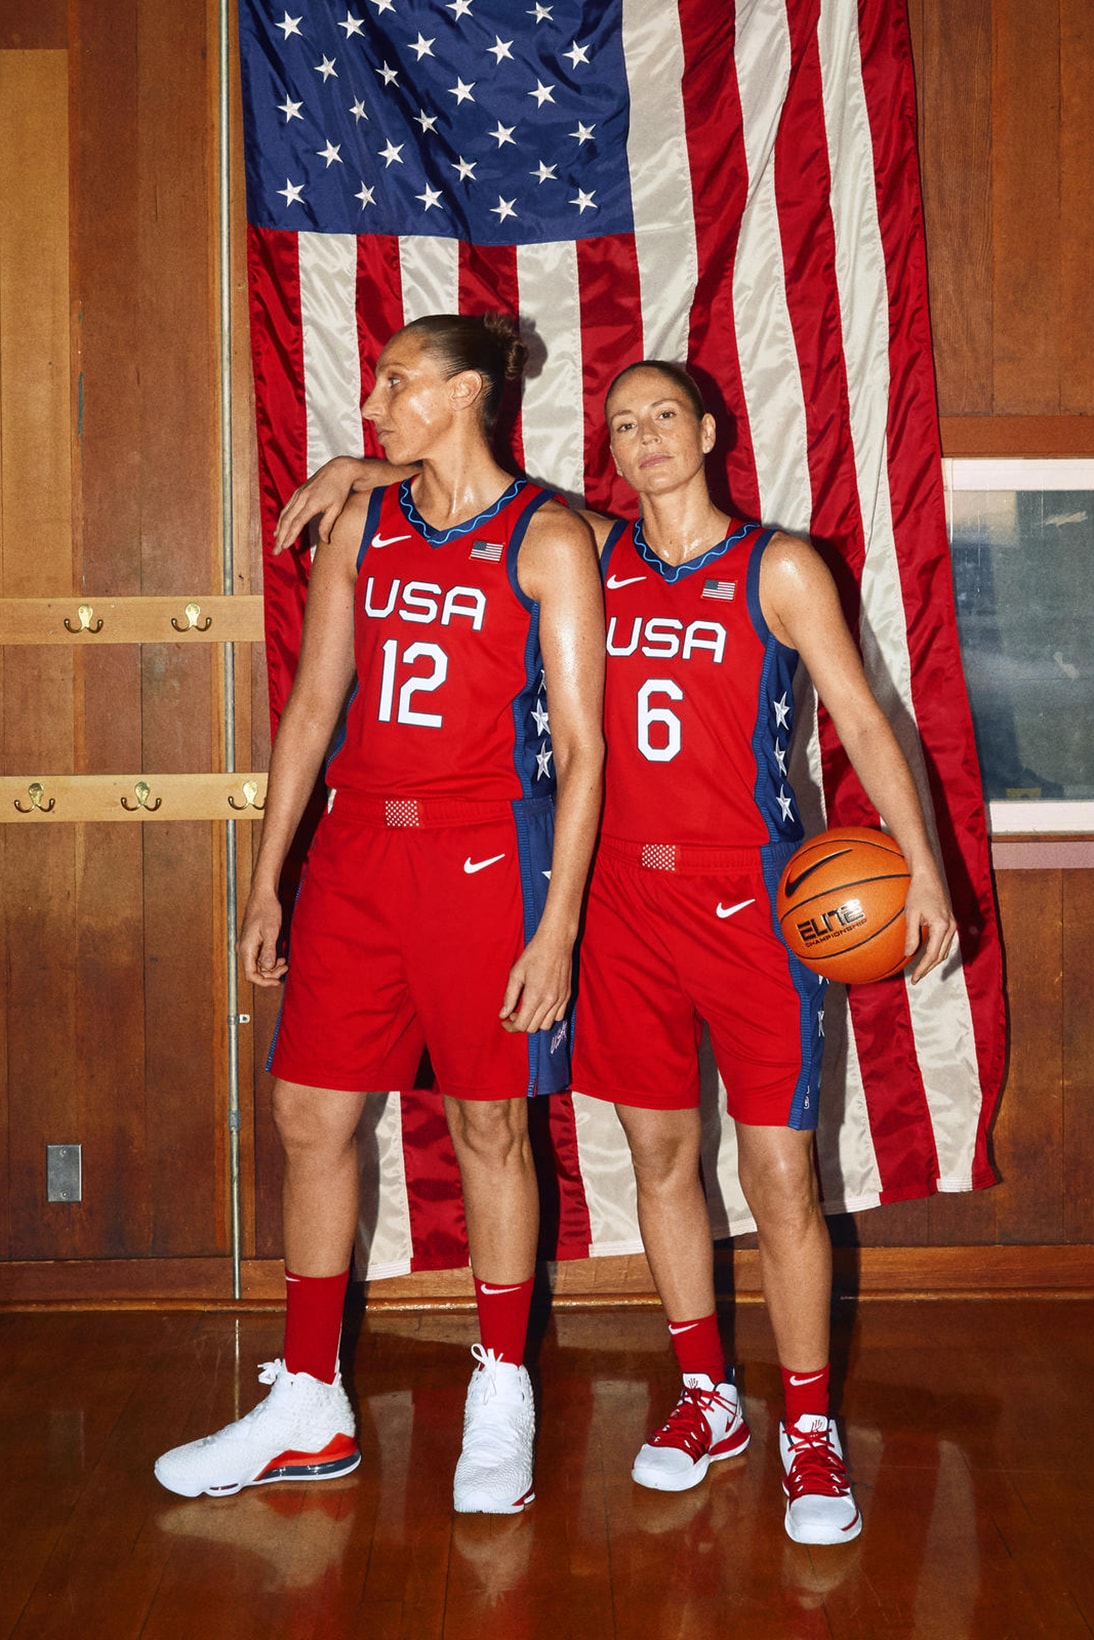 Nike's USA Track and Field uniforms unveiled